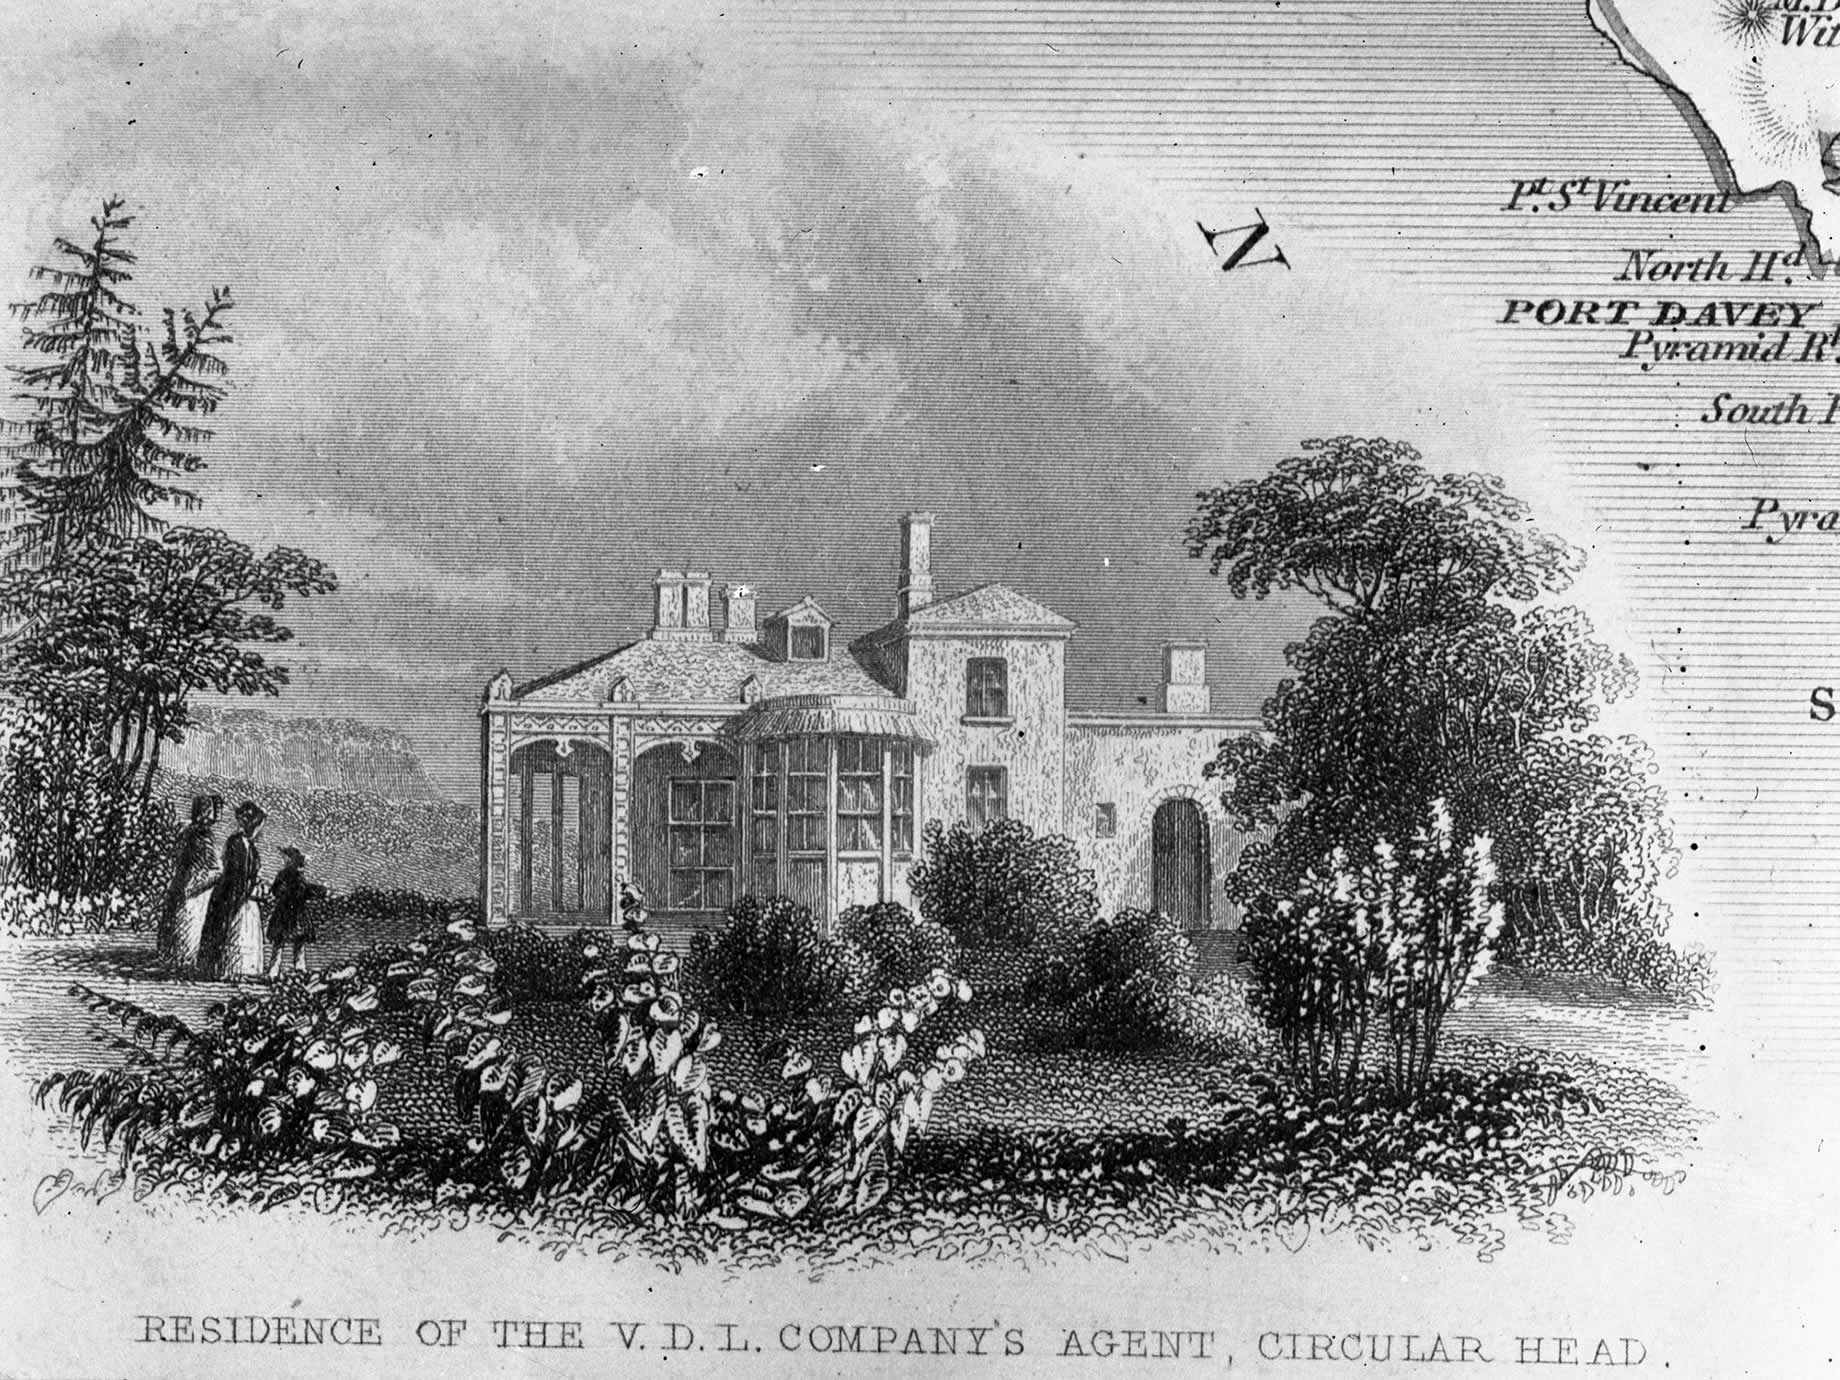 The residence of the first Chief Agent of the VDL Company (Edward Curr), now known as Highfield House